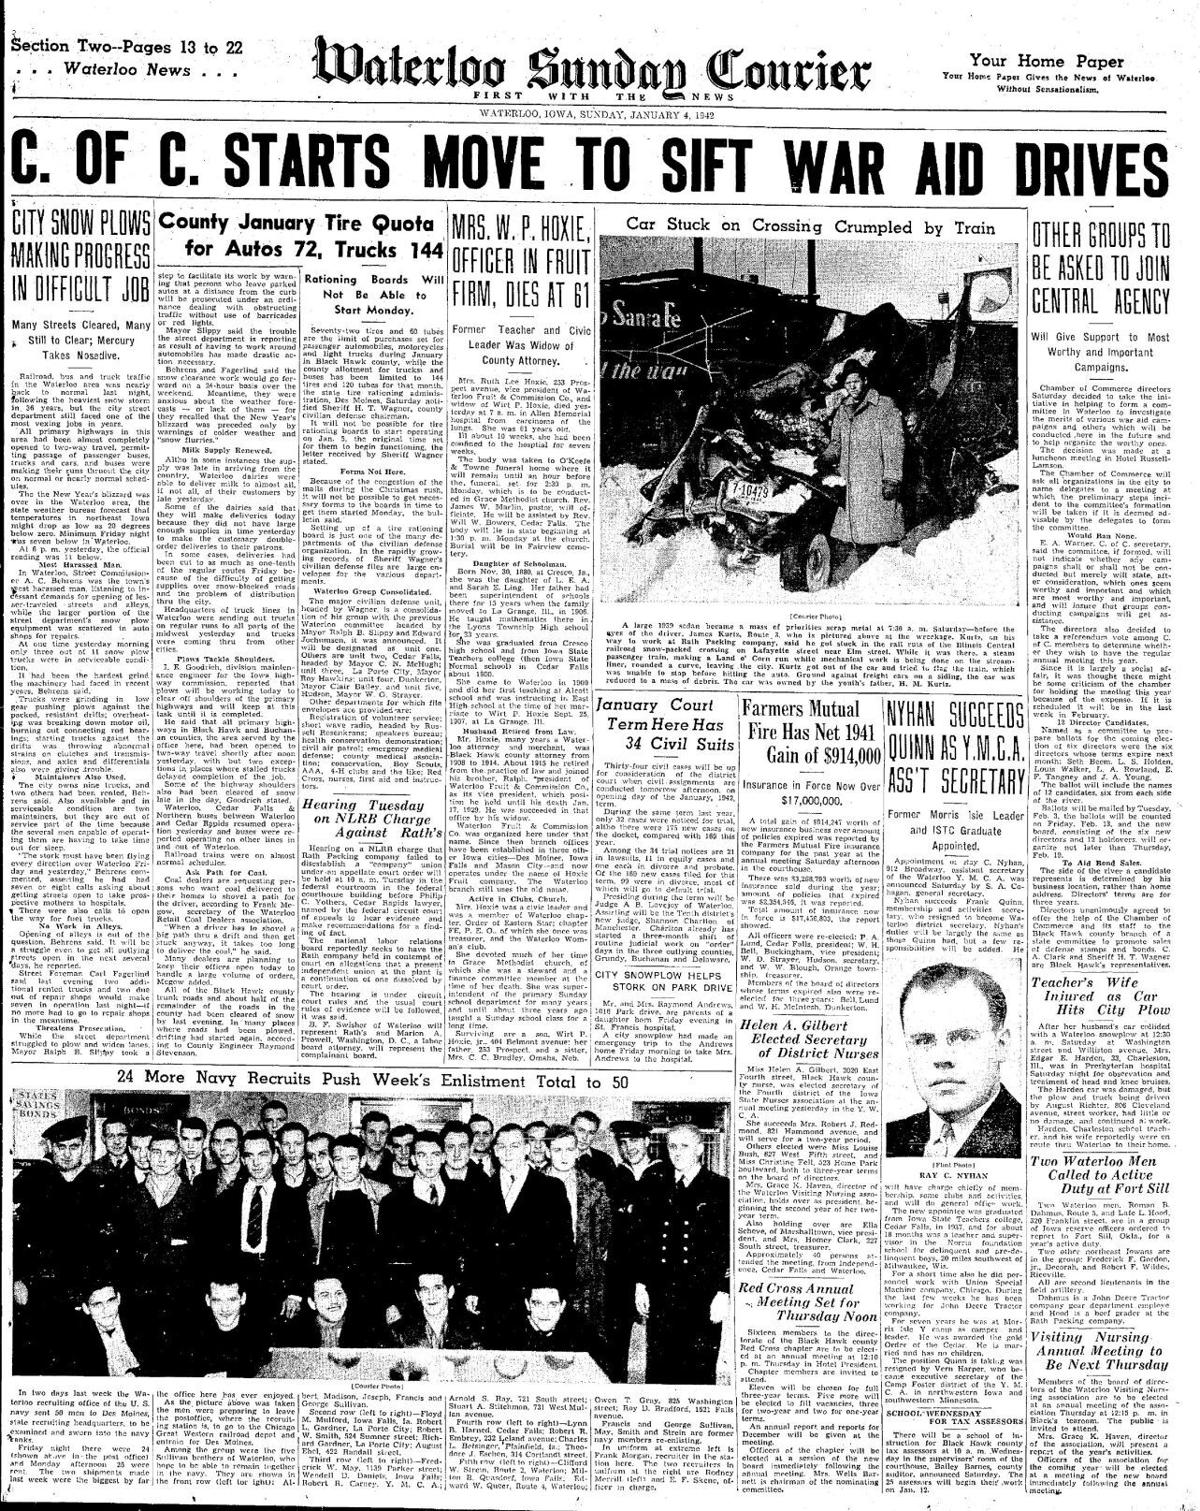 Courier Jan. 4, 1942